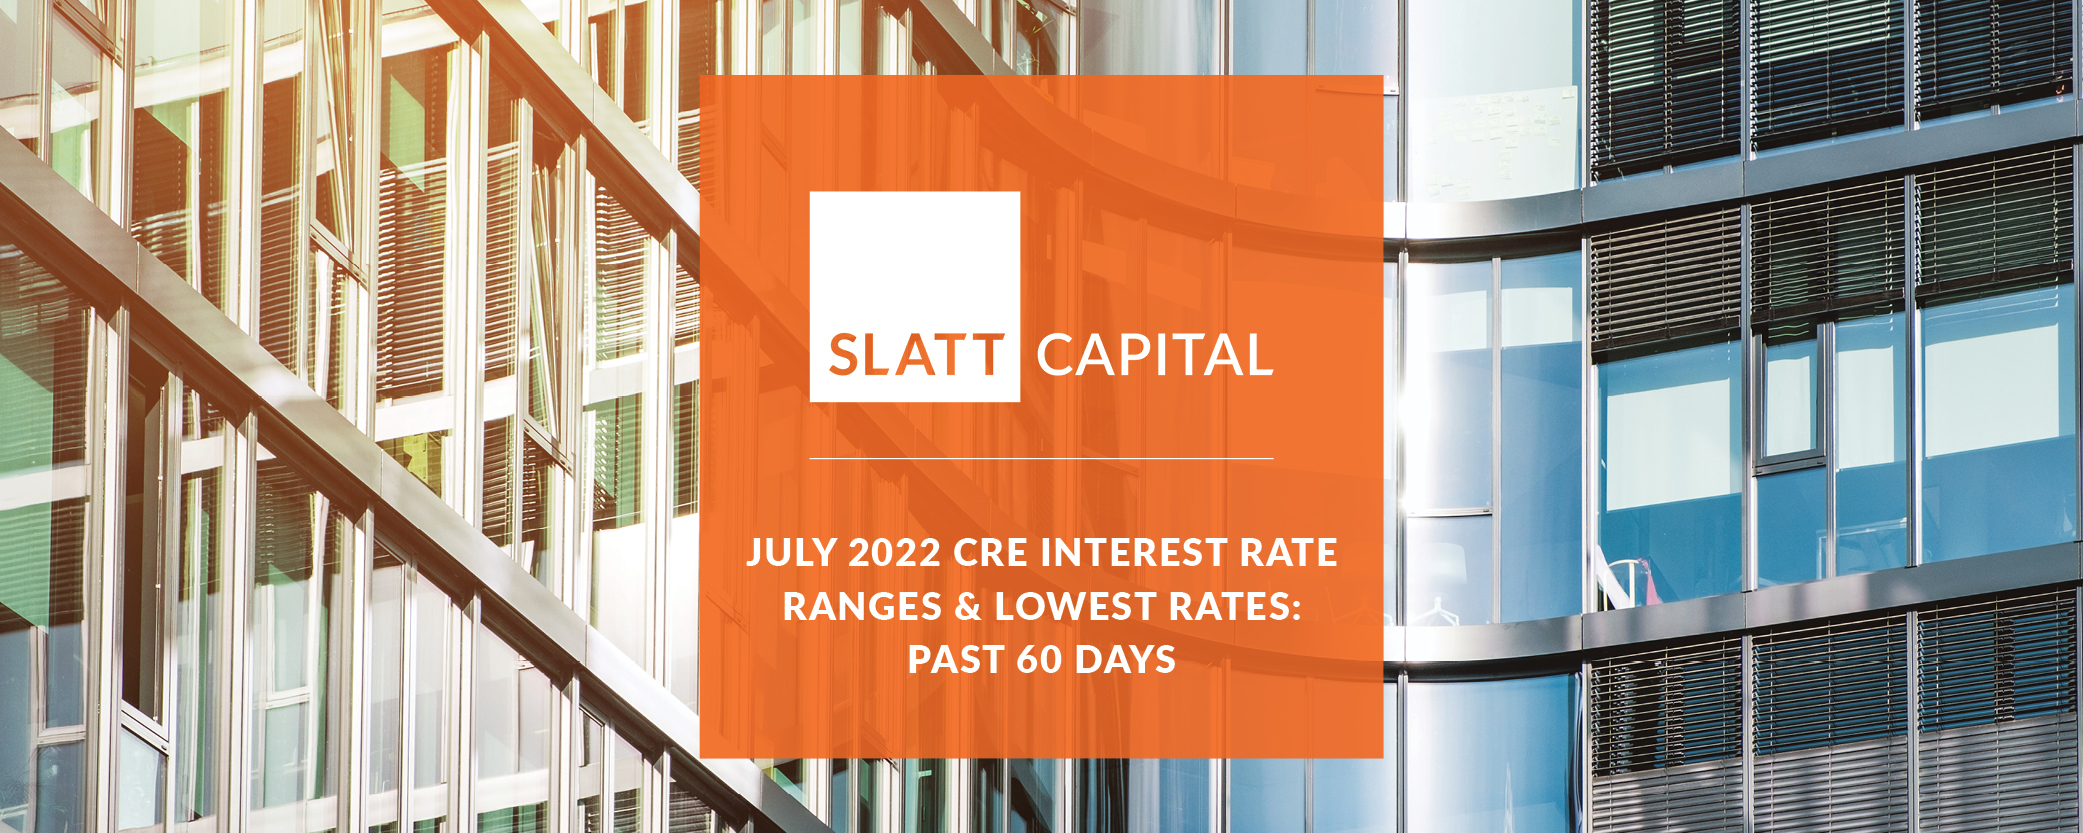 July 2022 cre interest rate ranges & lowest rates: past 60 days